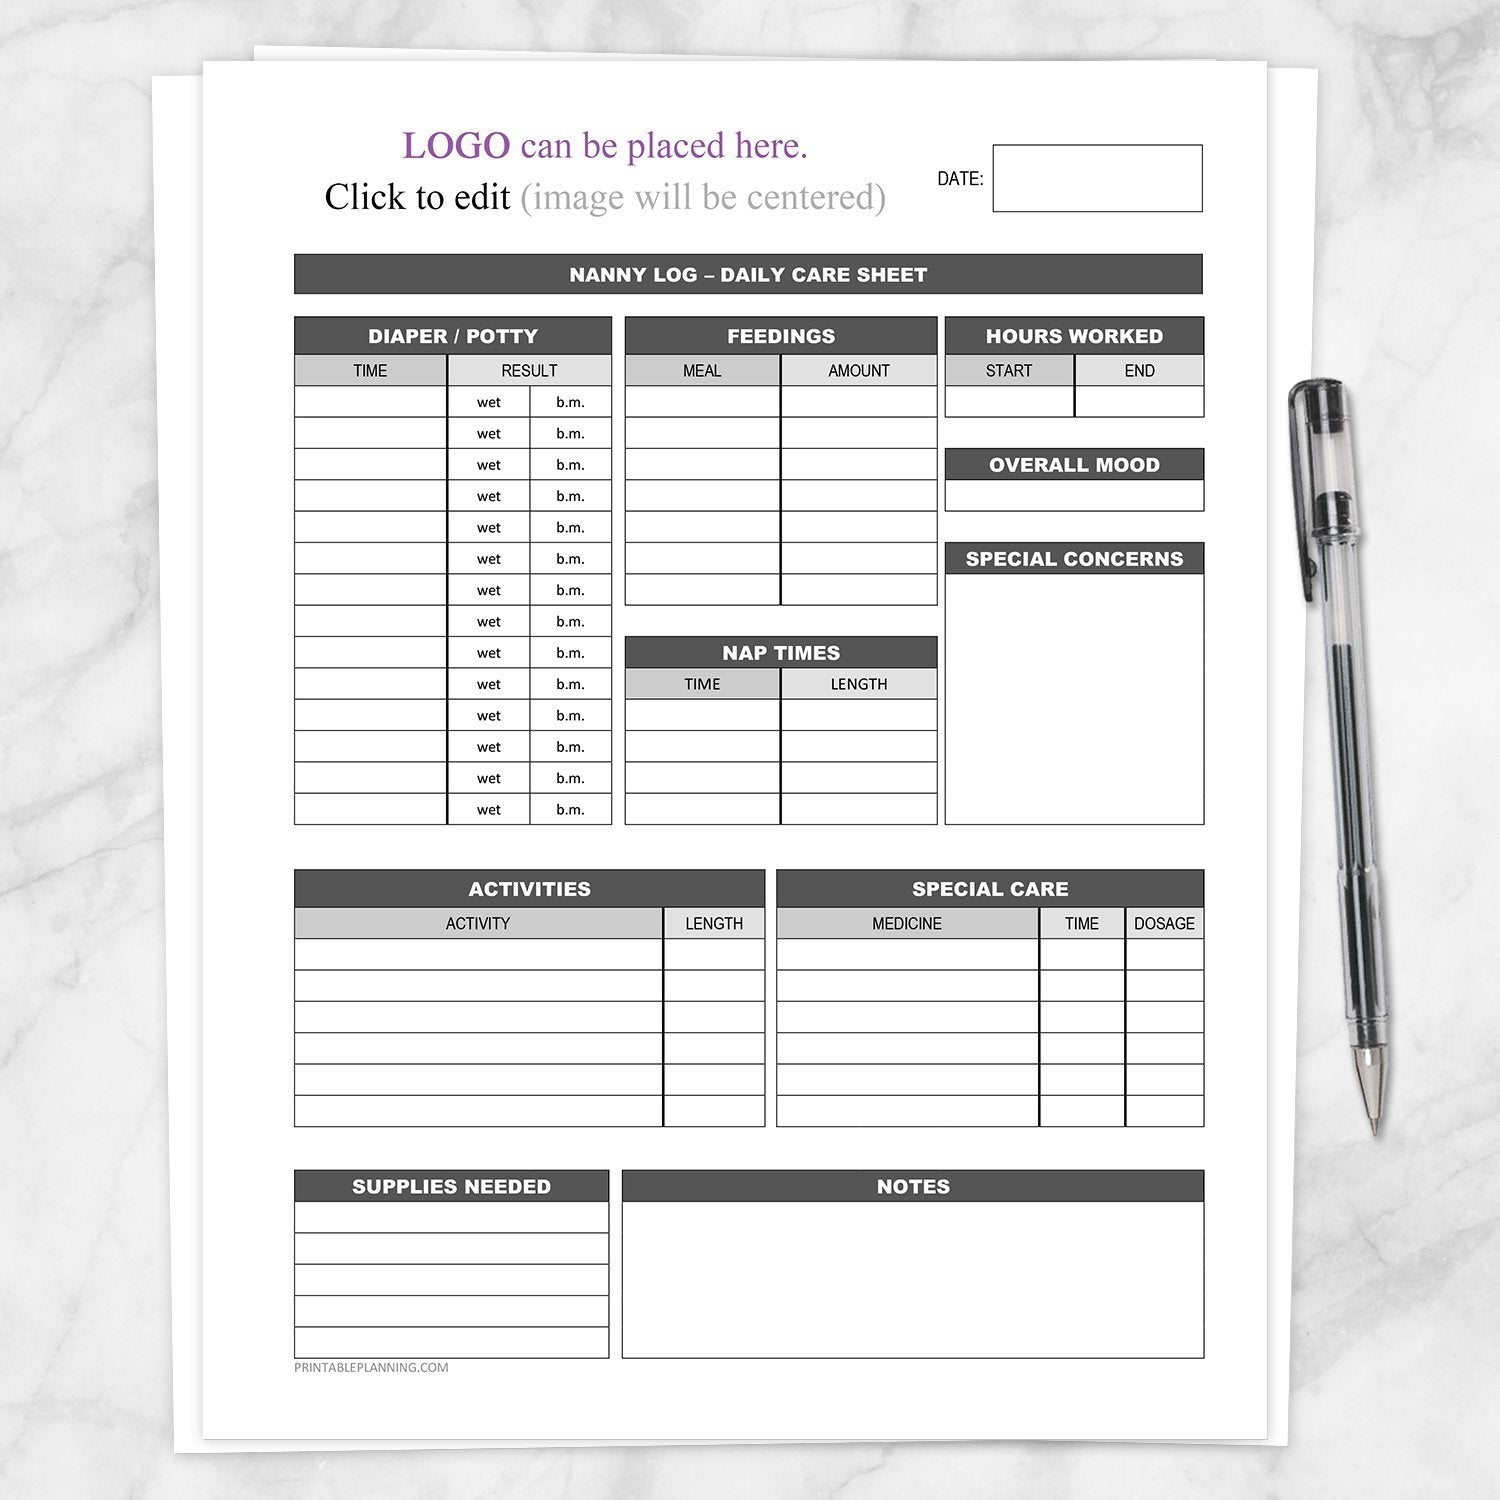 nanny-log-with-your-logo-daily-infant-and-child-care-sheet